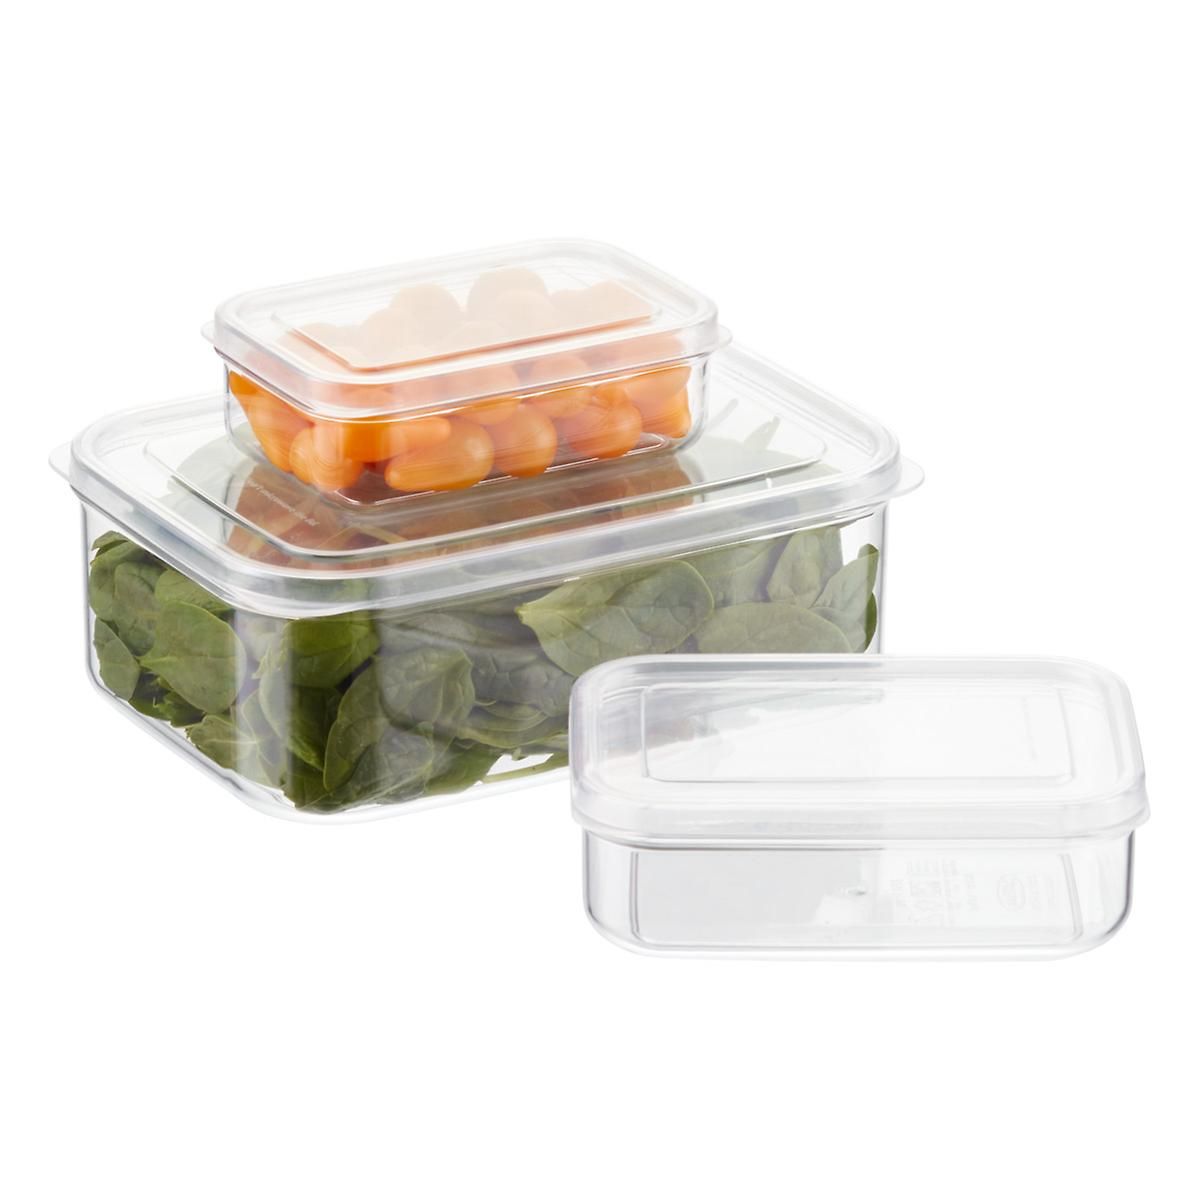 Lustroware Crystal Clear Rectangular Food Storage | The Container Store